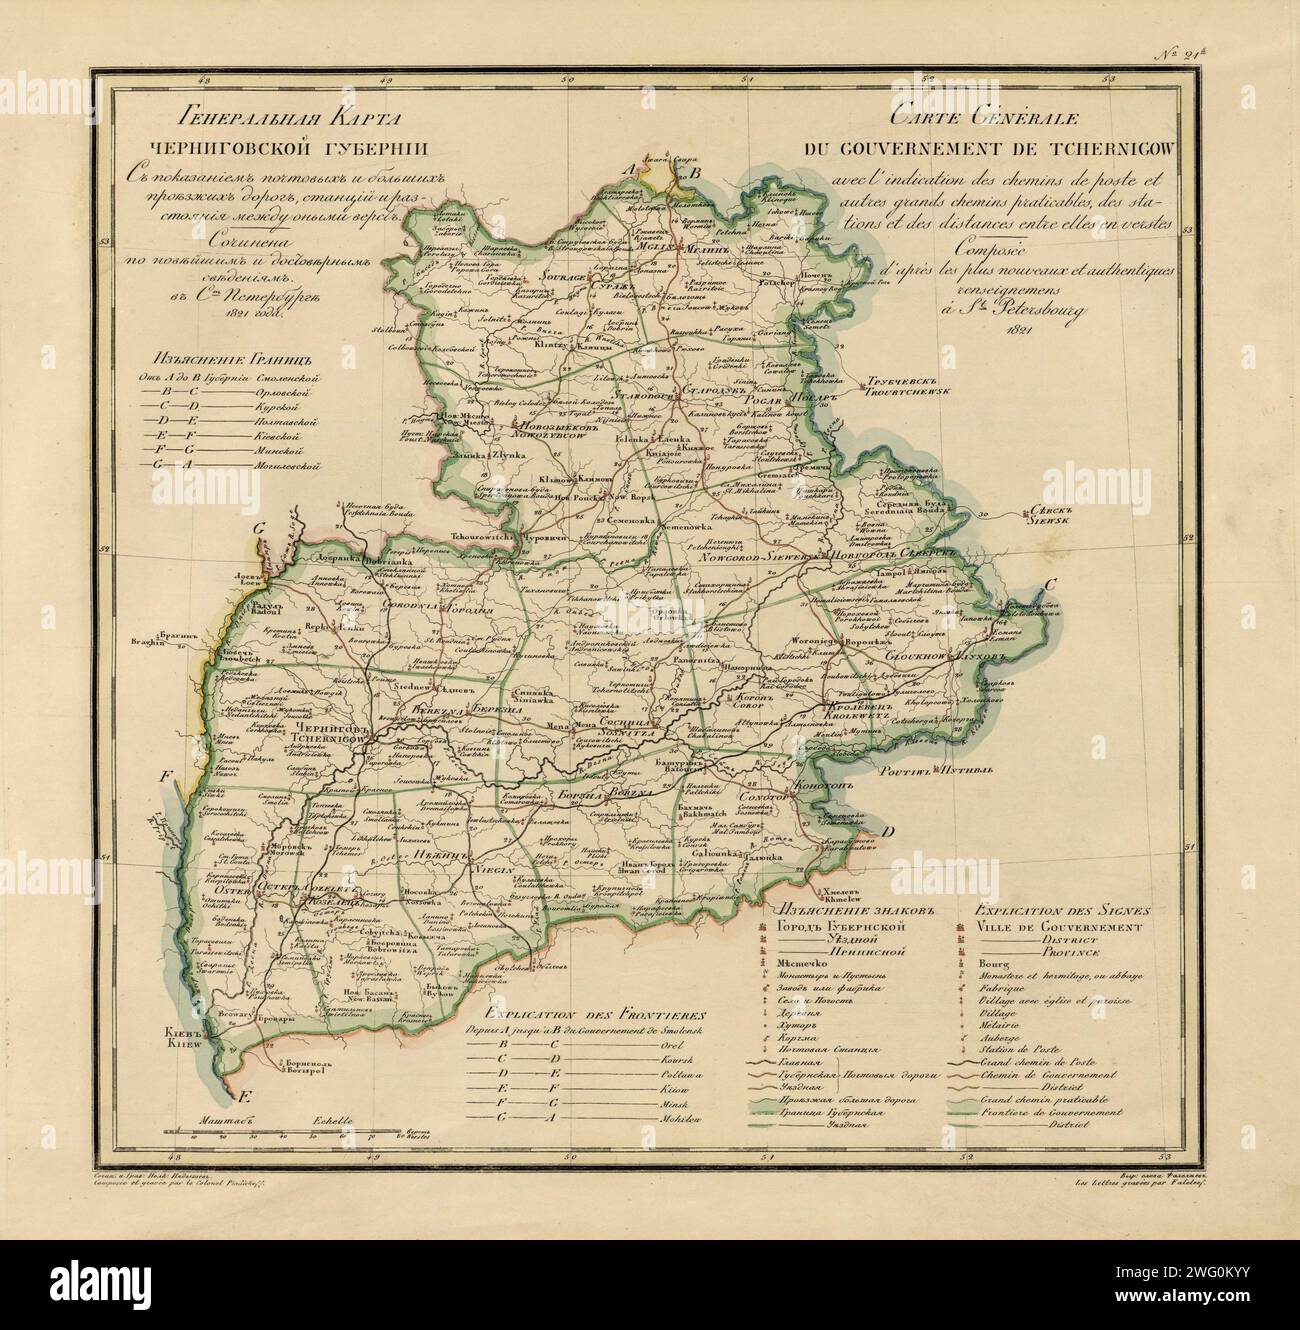 General Map of Chernigov Province: Showing Postal and Major Roads, Stations and the Distance in Versts between Them, 1821. This 1821 map of Chernigov Provinceis from a larger work,Geograficheskii atlas Rossiiskoi imperii, tsarstva Pol'skogo i velikogo kniazhestva Finliandskogo(Geographical atlas of the Russian Empire, the Kingdom of Poland, and the Grand Duchy of Finland), containing 60 maps of the Russian Empire. Compiled and engraved by Colonel V.P. Piadyshev, it reflects the detailed mapping carried out by Russian military cartographers in the first quarter of the 19th century. The map show Stock Photo